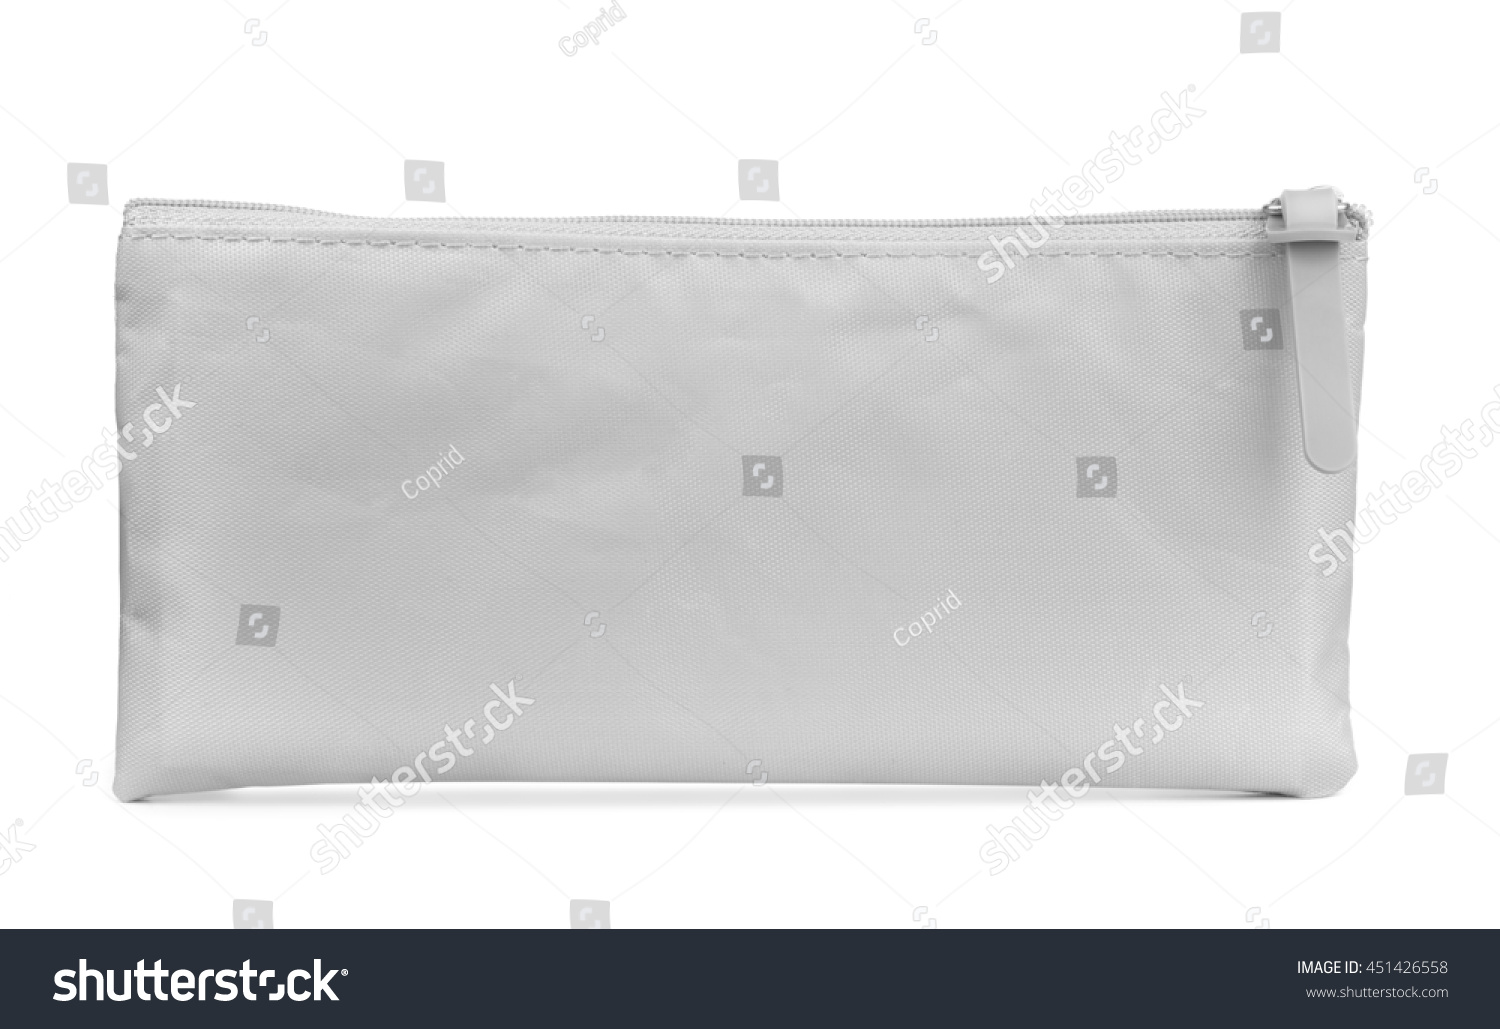 Front view of grey pencil case isolated on white #451426558